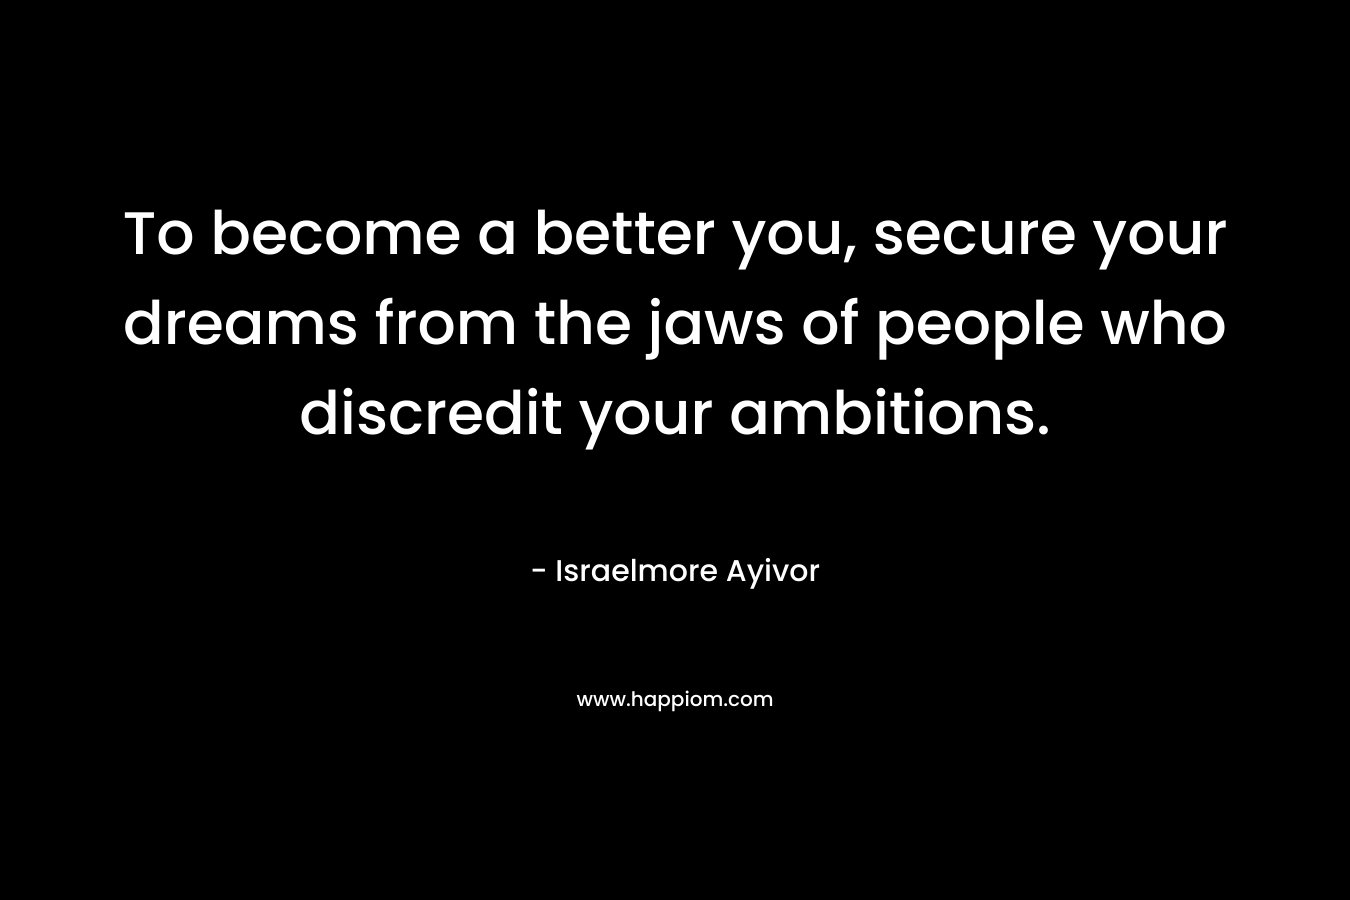 To become a better you, secure your dreams from the jaws of people who discredit your ambitions. – Israelmore Ayivor